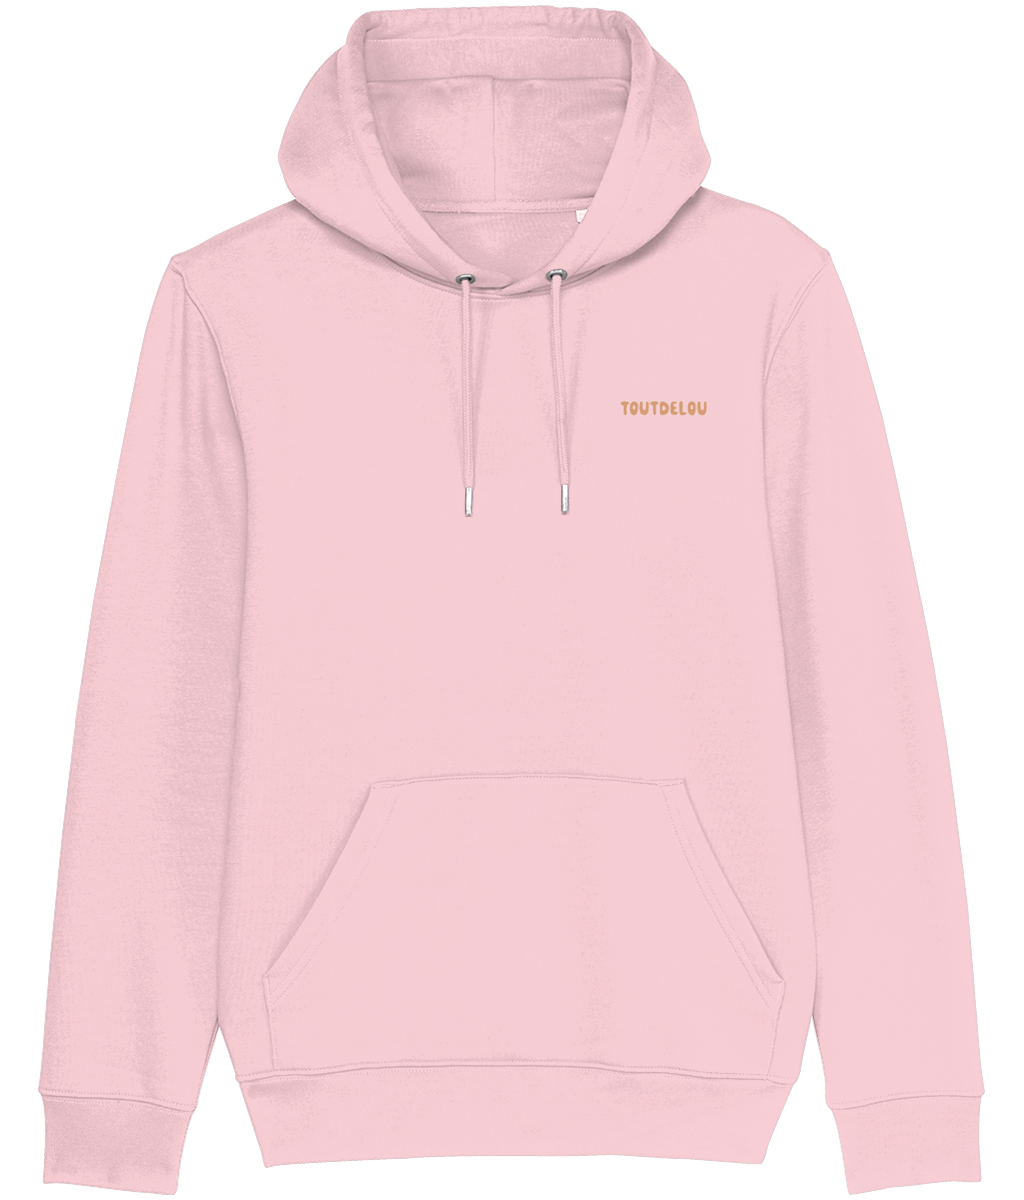 Hoodie - pet all the dogs - peach - print on front and back